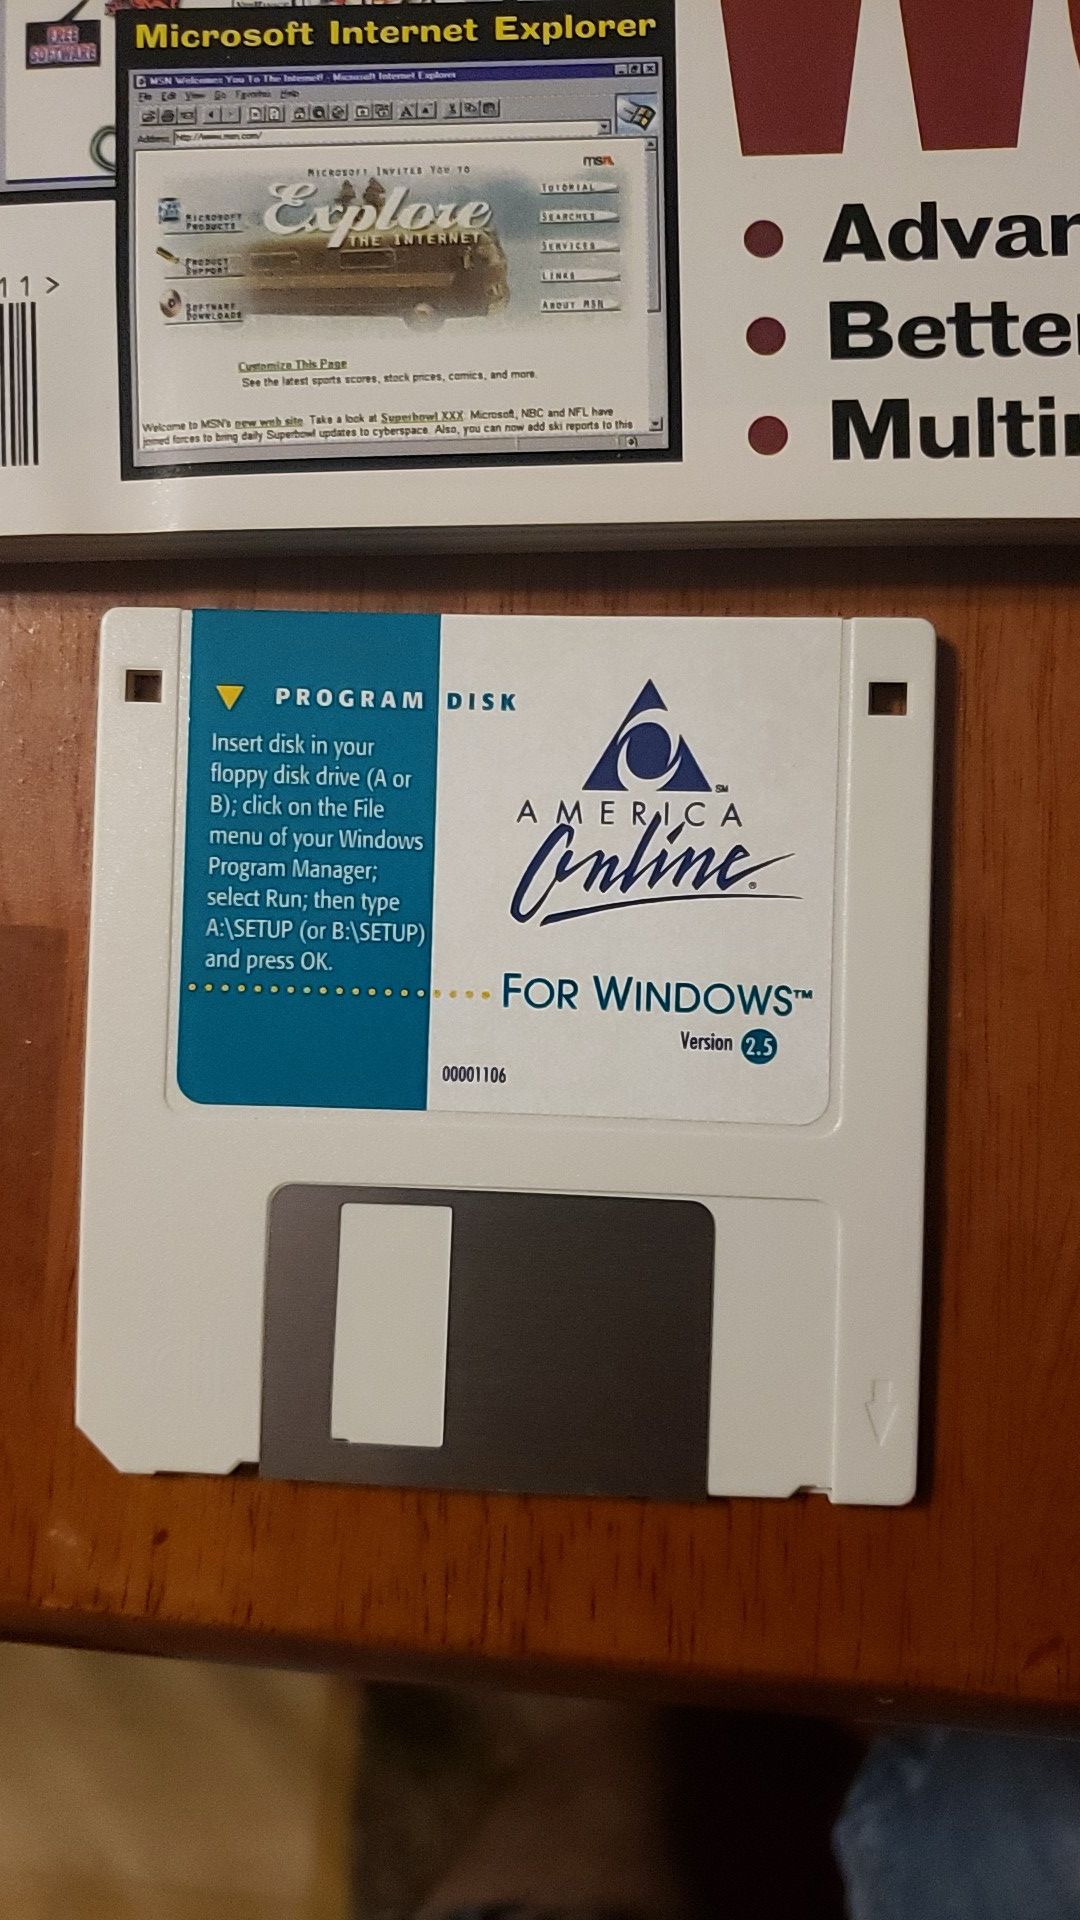 Floppy disk and March '96 PC magazine